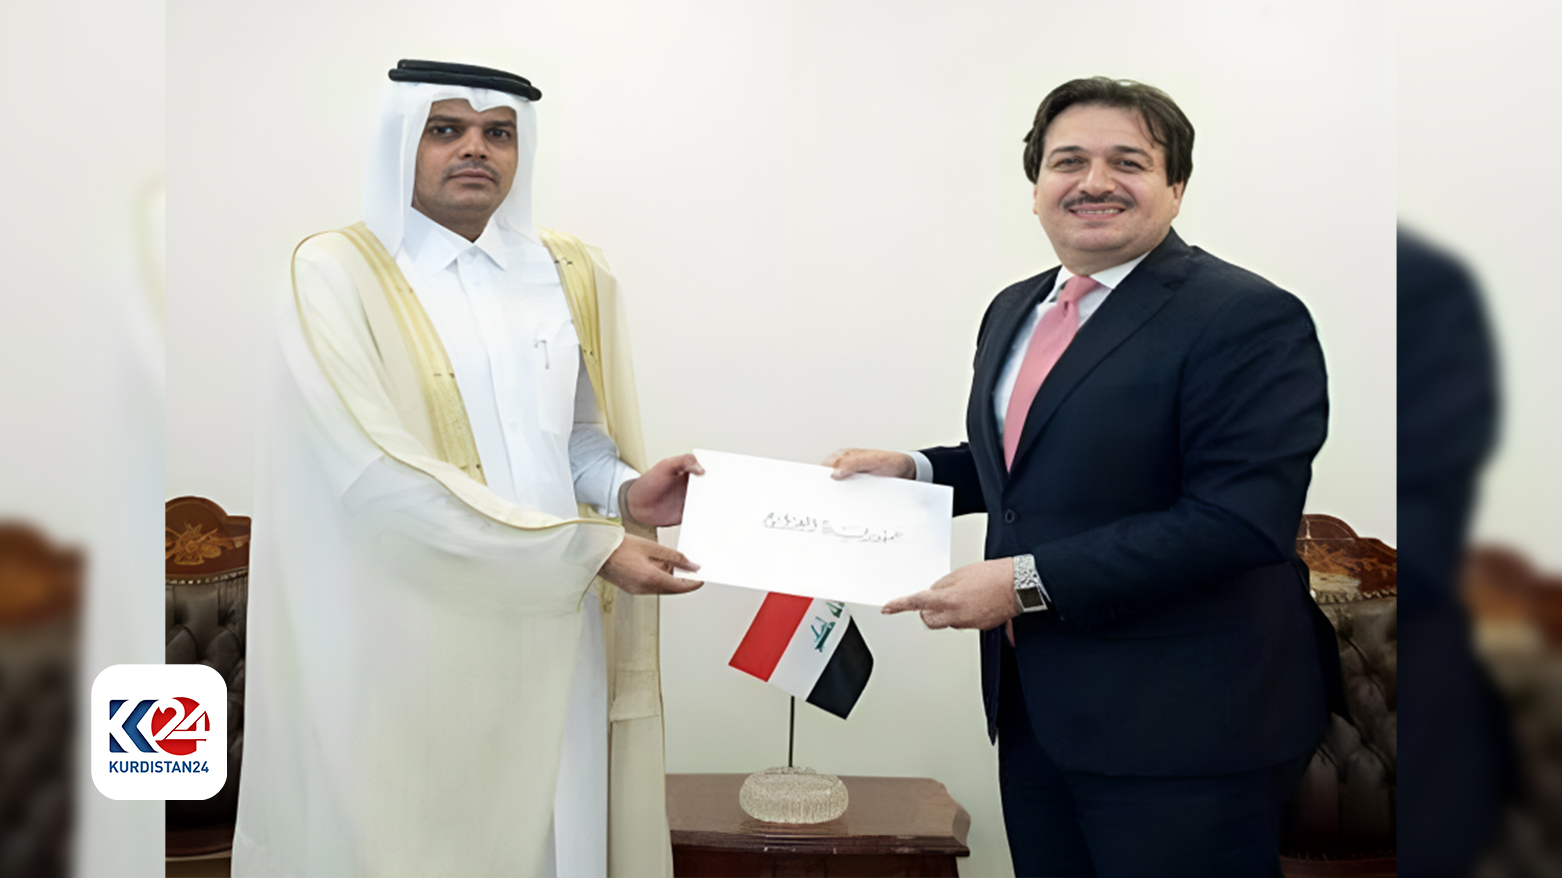 Ammar Dawood, Head of the Protocol Department at the Iraqi Ministry of Foreign Affairs (right), posing for a picture with the new Consul General of Qatar in Erbil, Hussein bin Ali al-Fadala. (Photo: Qatar Ministry of Foreign Affairs)